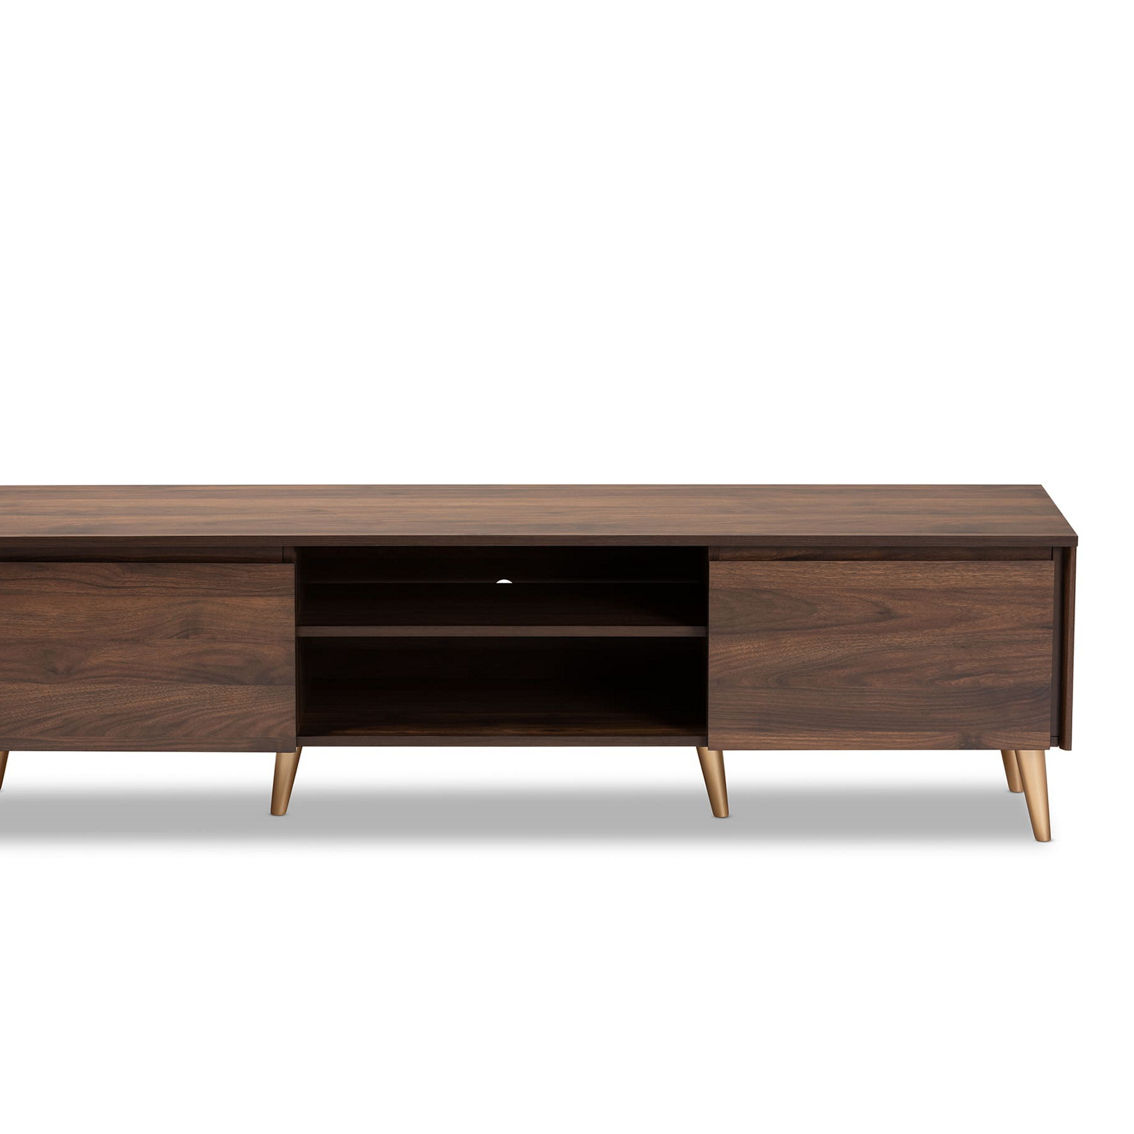 Baxton Studio Landen Walnut Brown and Gold Finished Wood TV Stand - Image 3 of 5